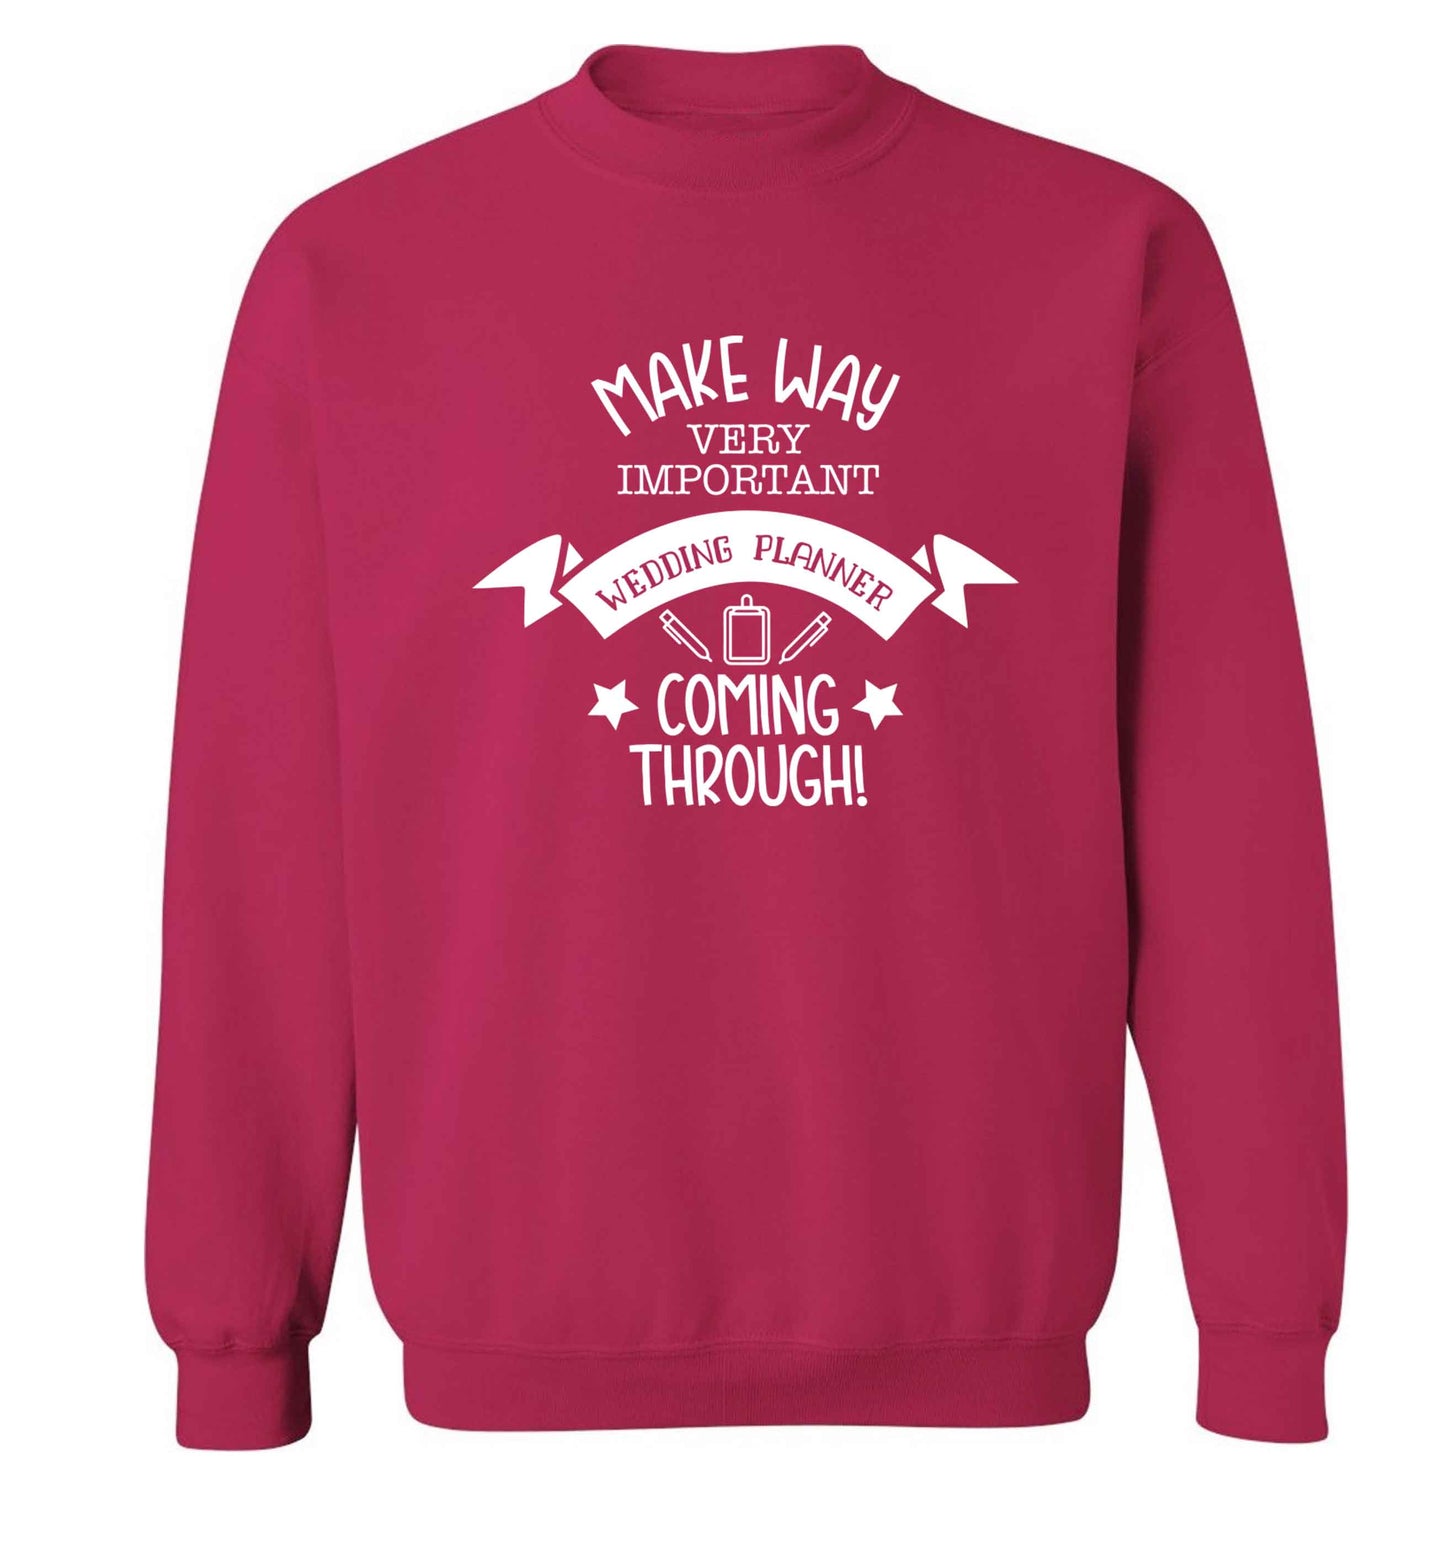 Make way very important wedding planner coming through Adult's unisex pink Sweater 2XL